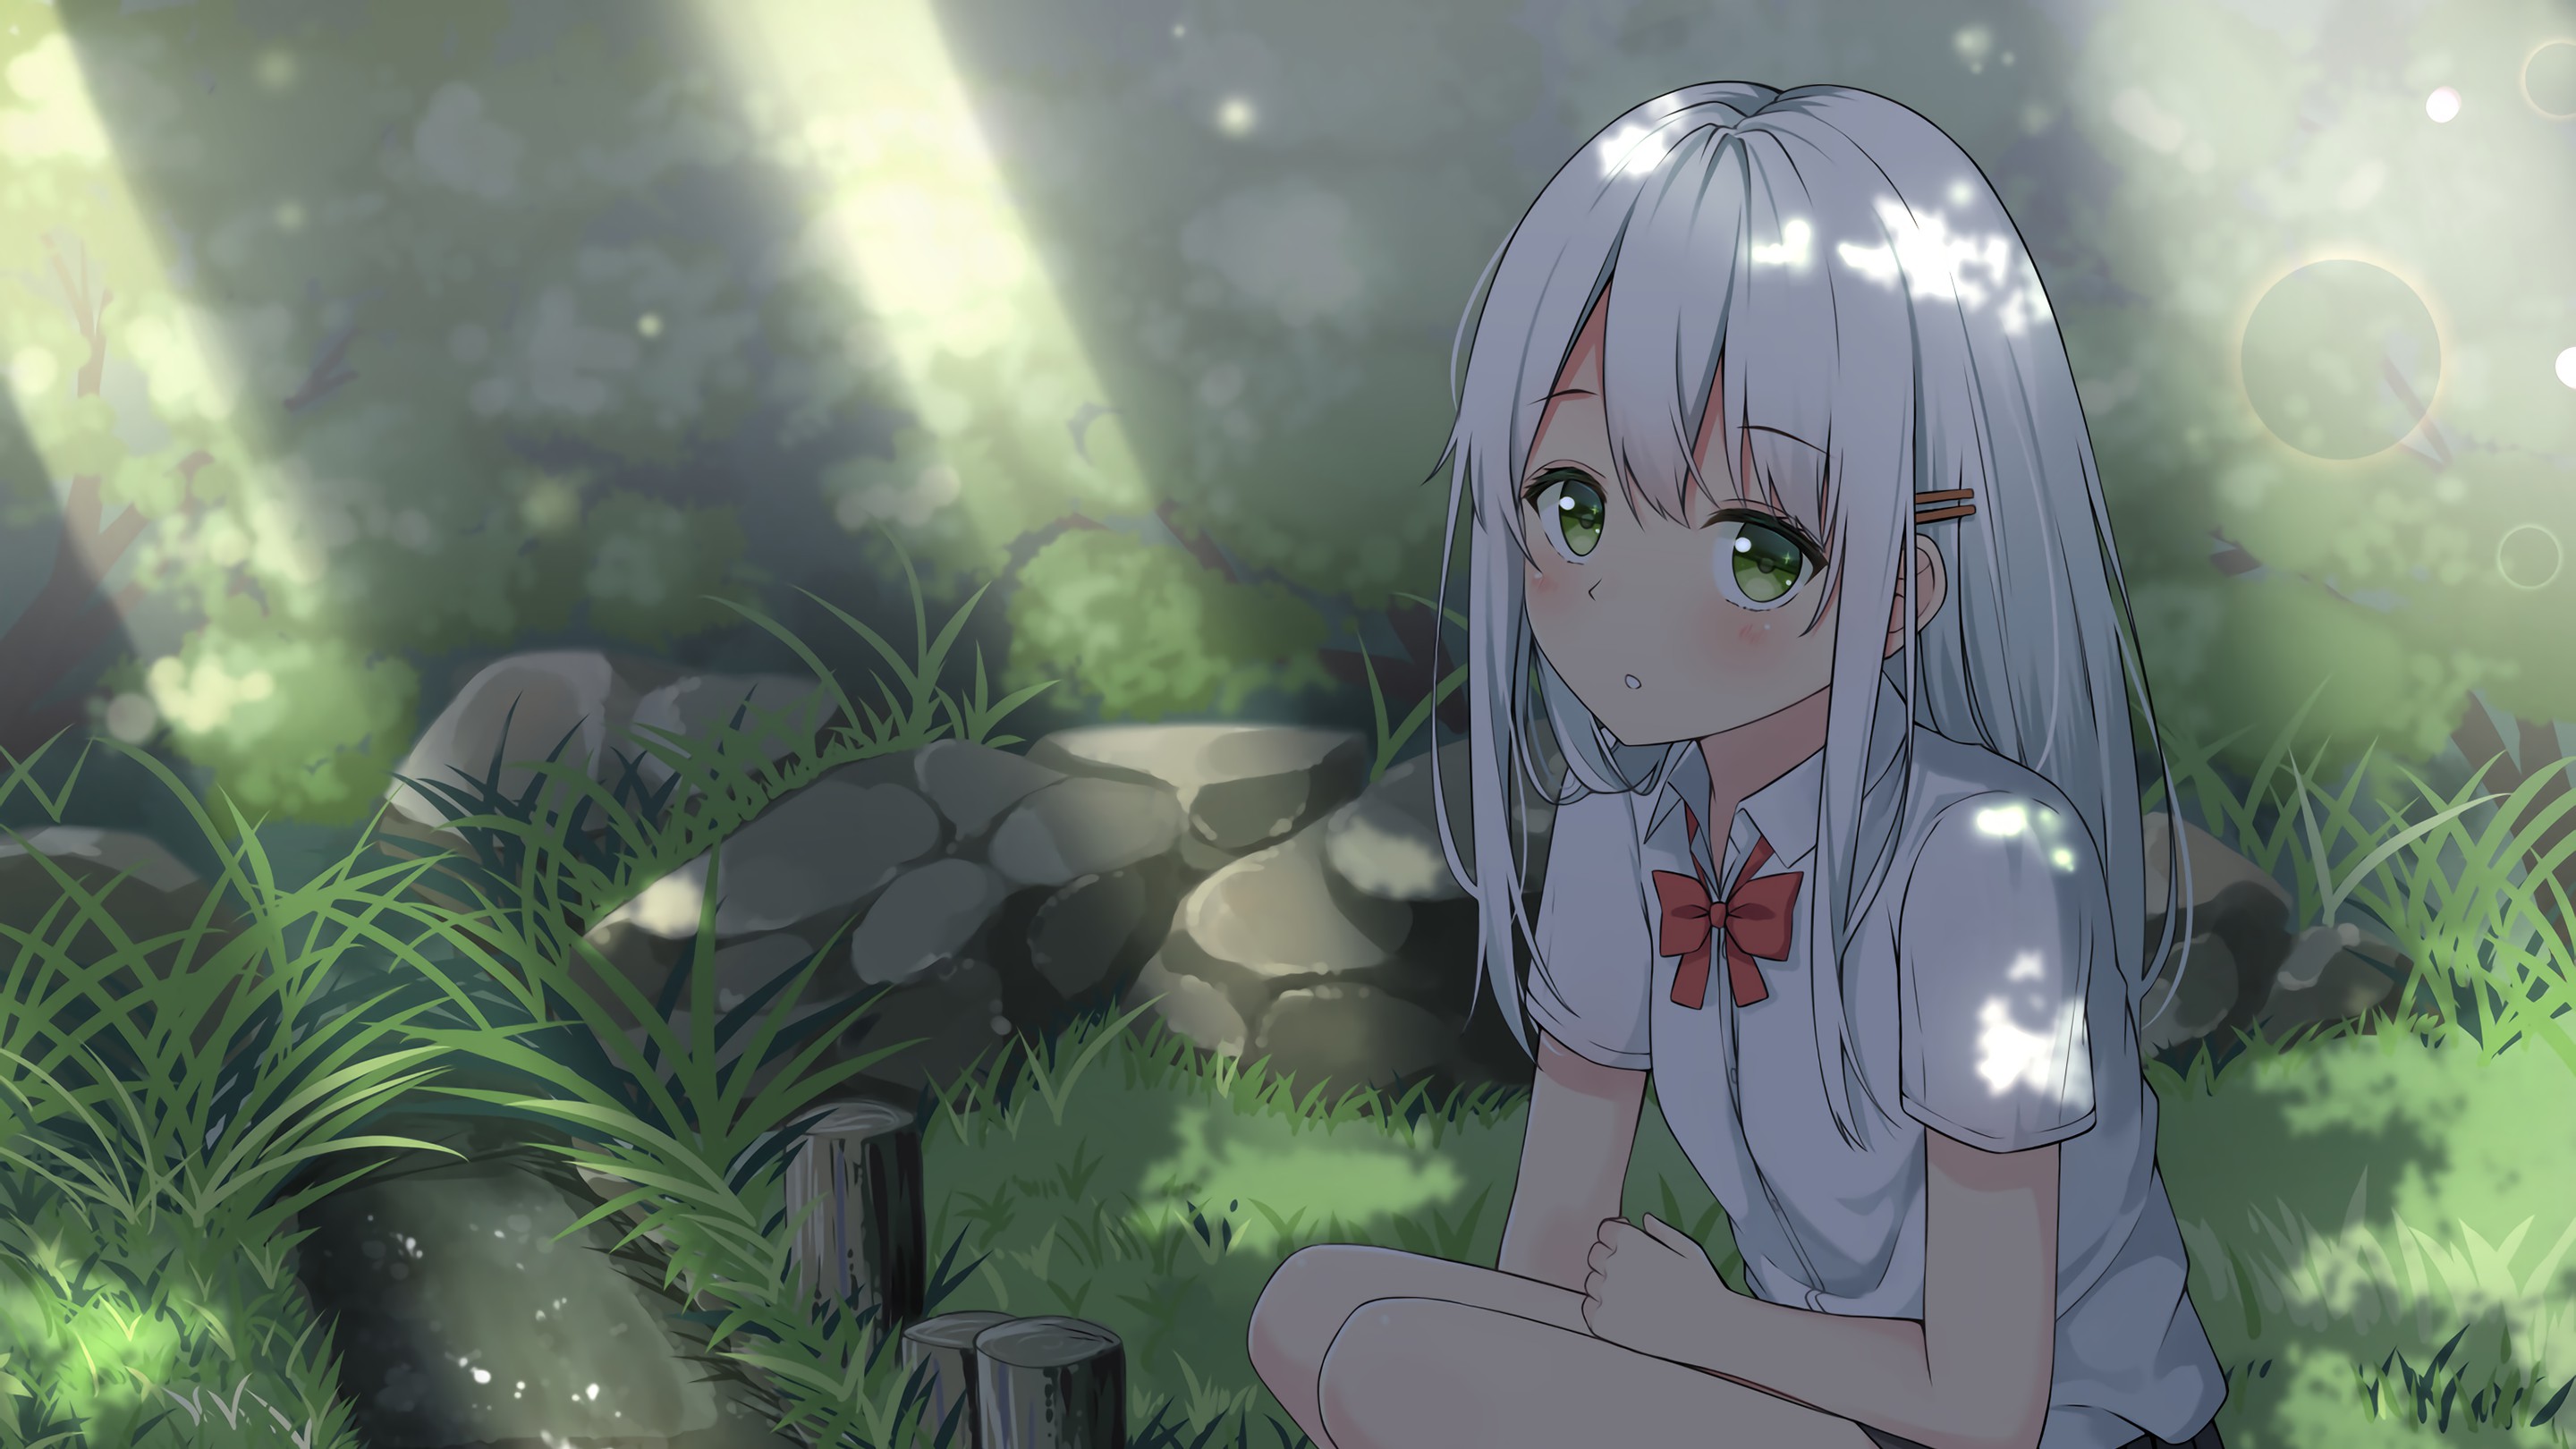 Anime Girls Artwork White Hair Green Eyes Summer Sad Leaves Nature Grass Sunlight Bow Tie Looking At 2880x1620